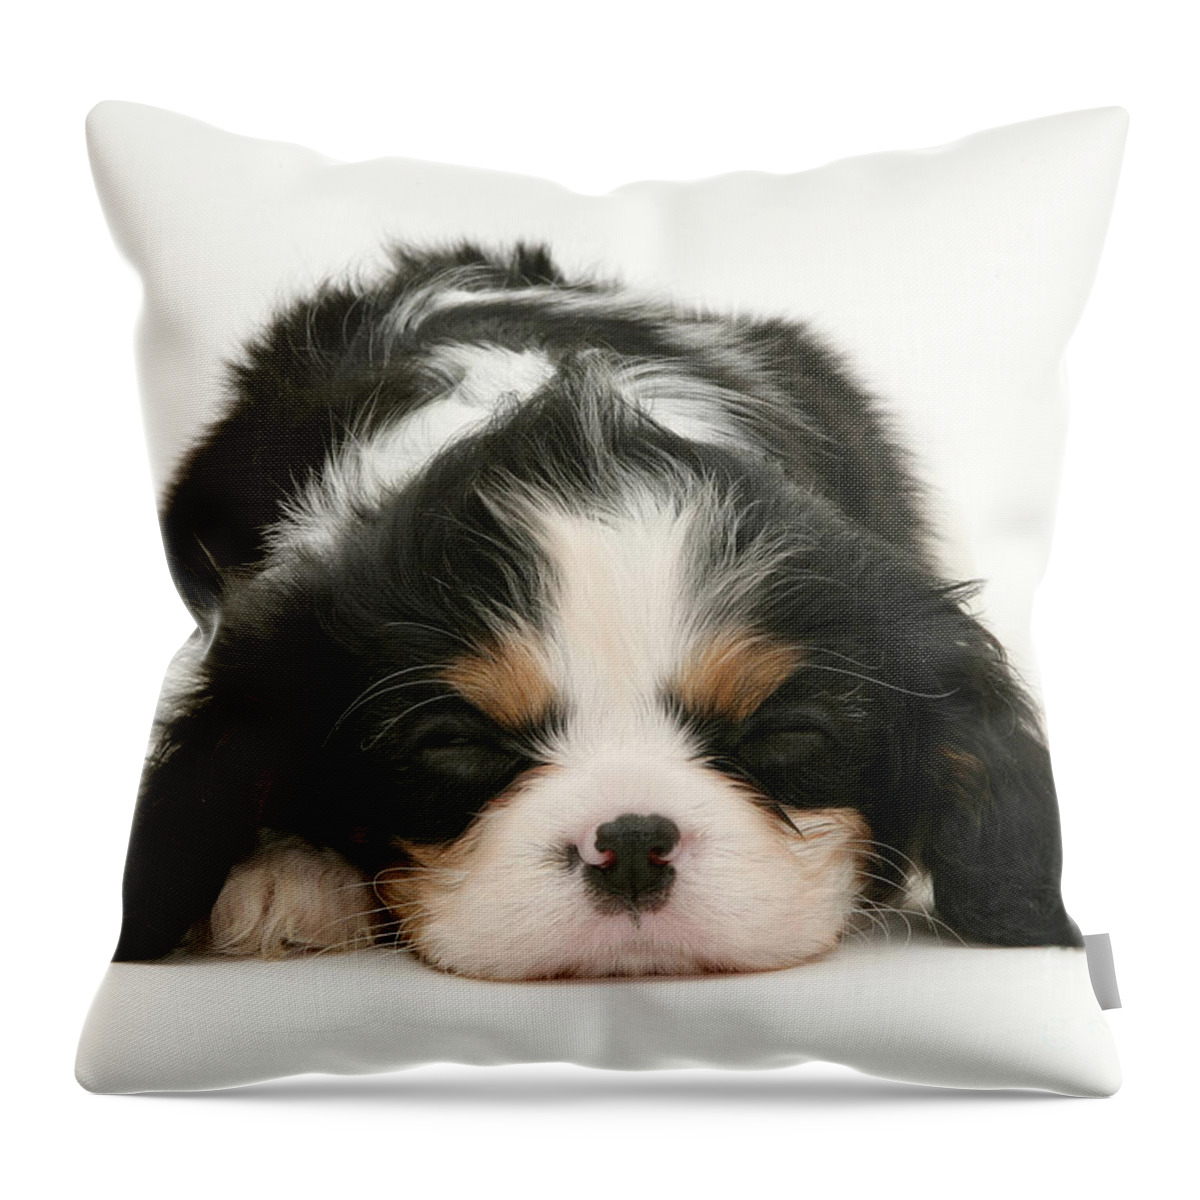 Animal Throw Pillow featuring the photograph Sleeping Puppy by Jane Burton